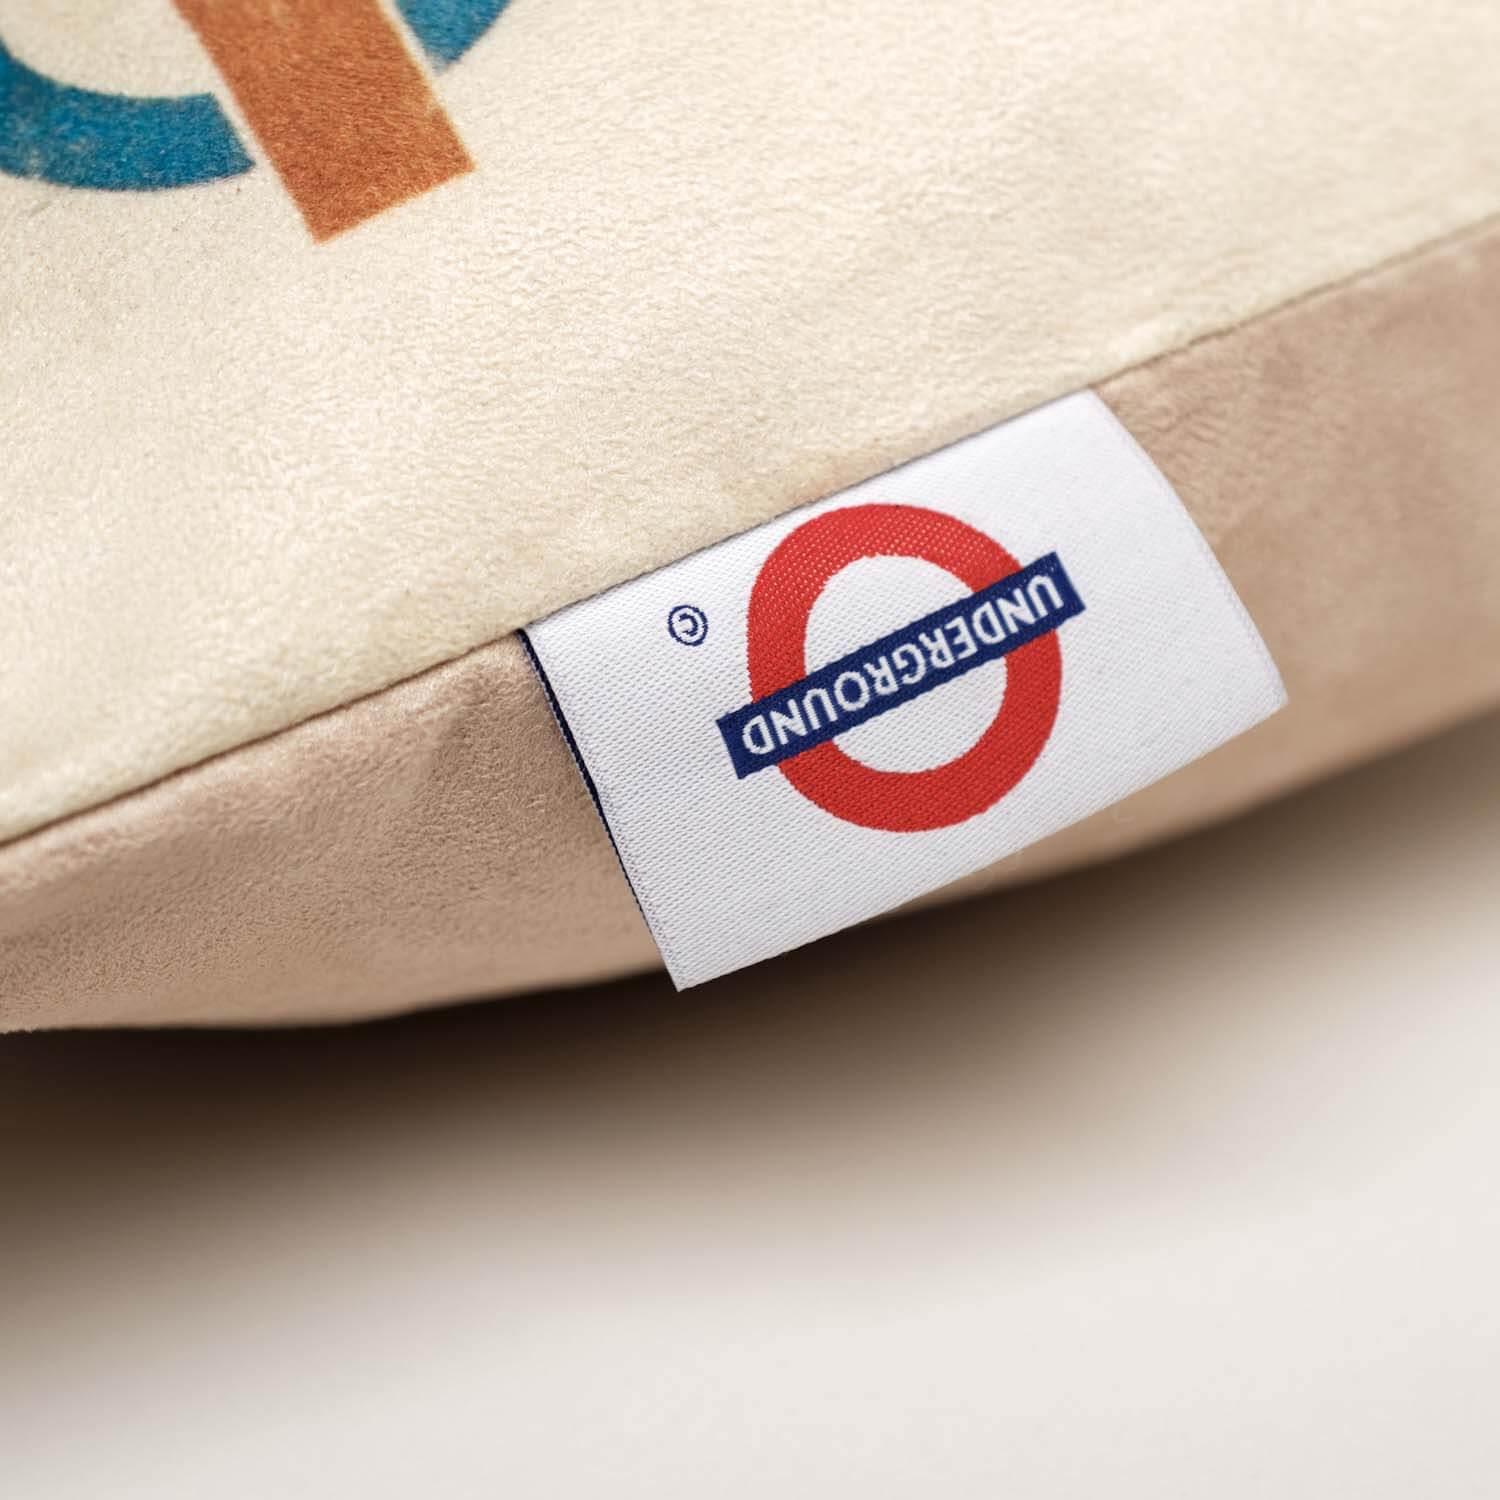 Come Out To Play - London Transport Cushion - Handmade Cushions UK - WeLoveCushions